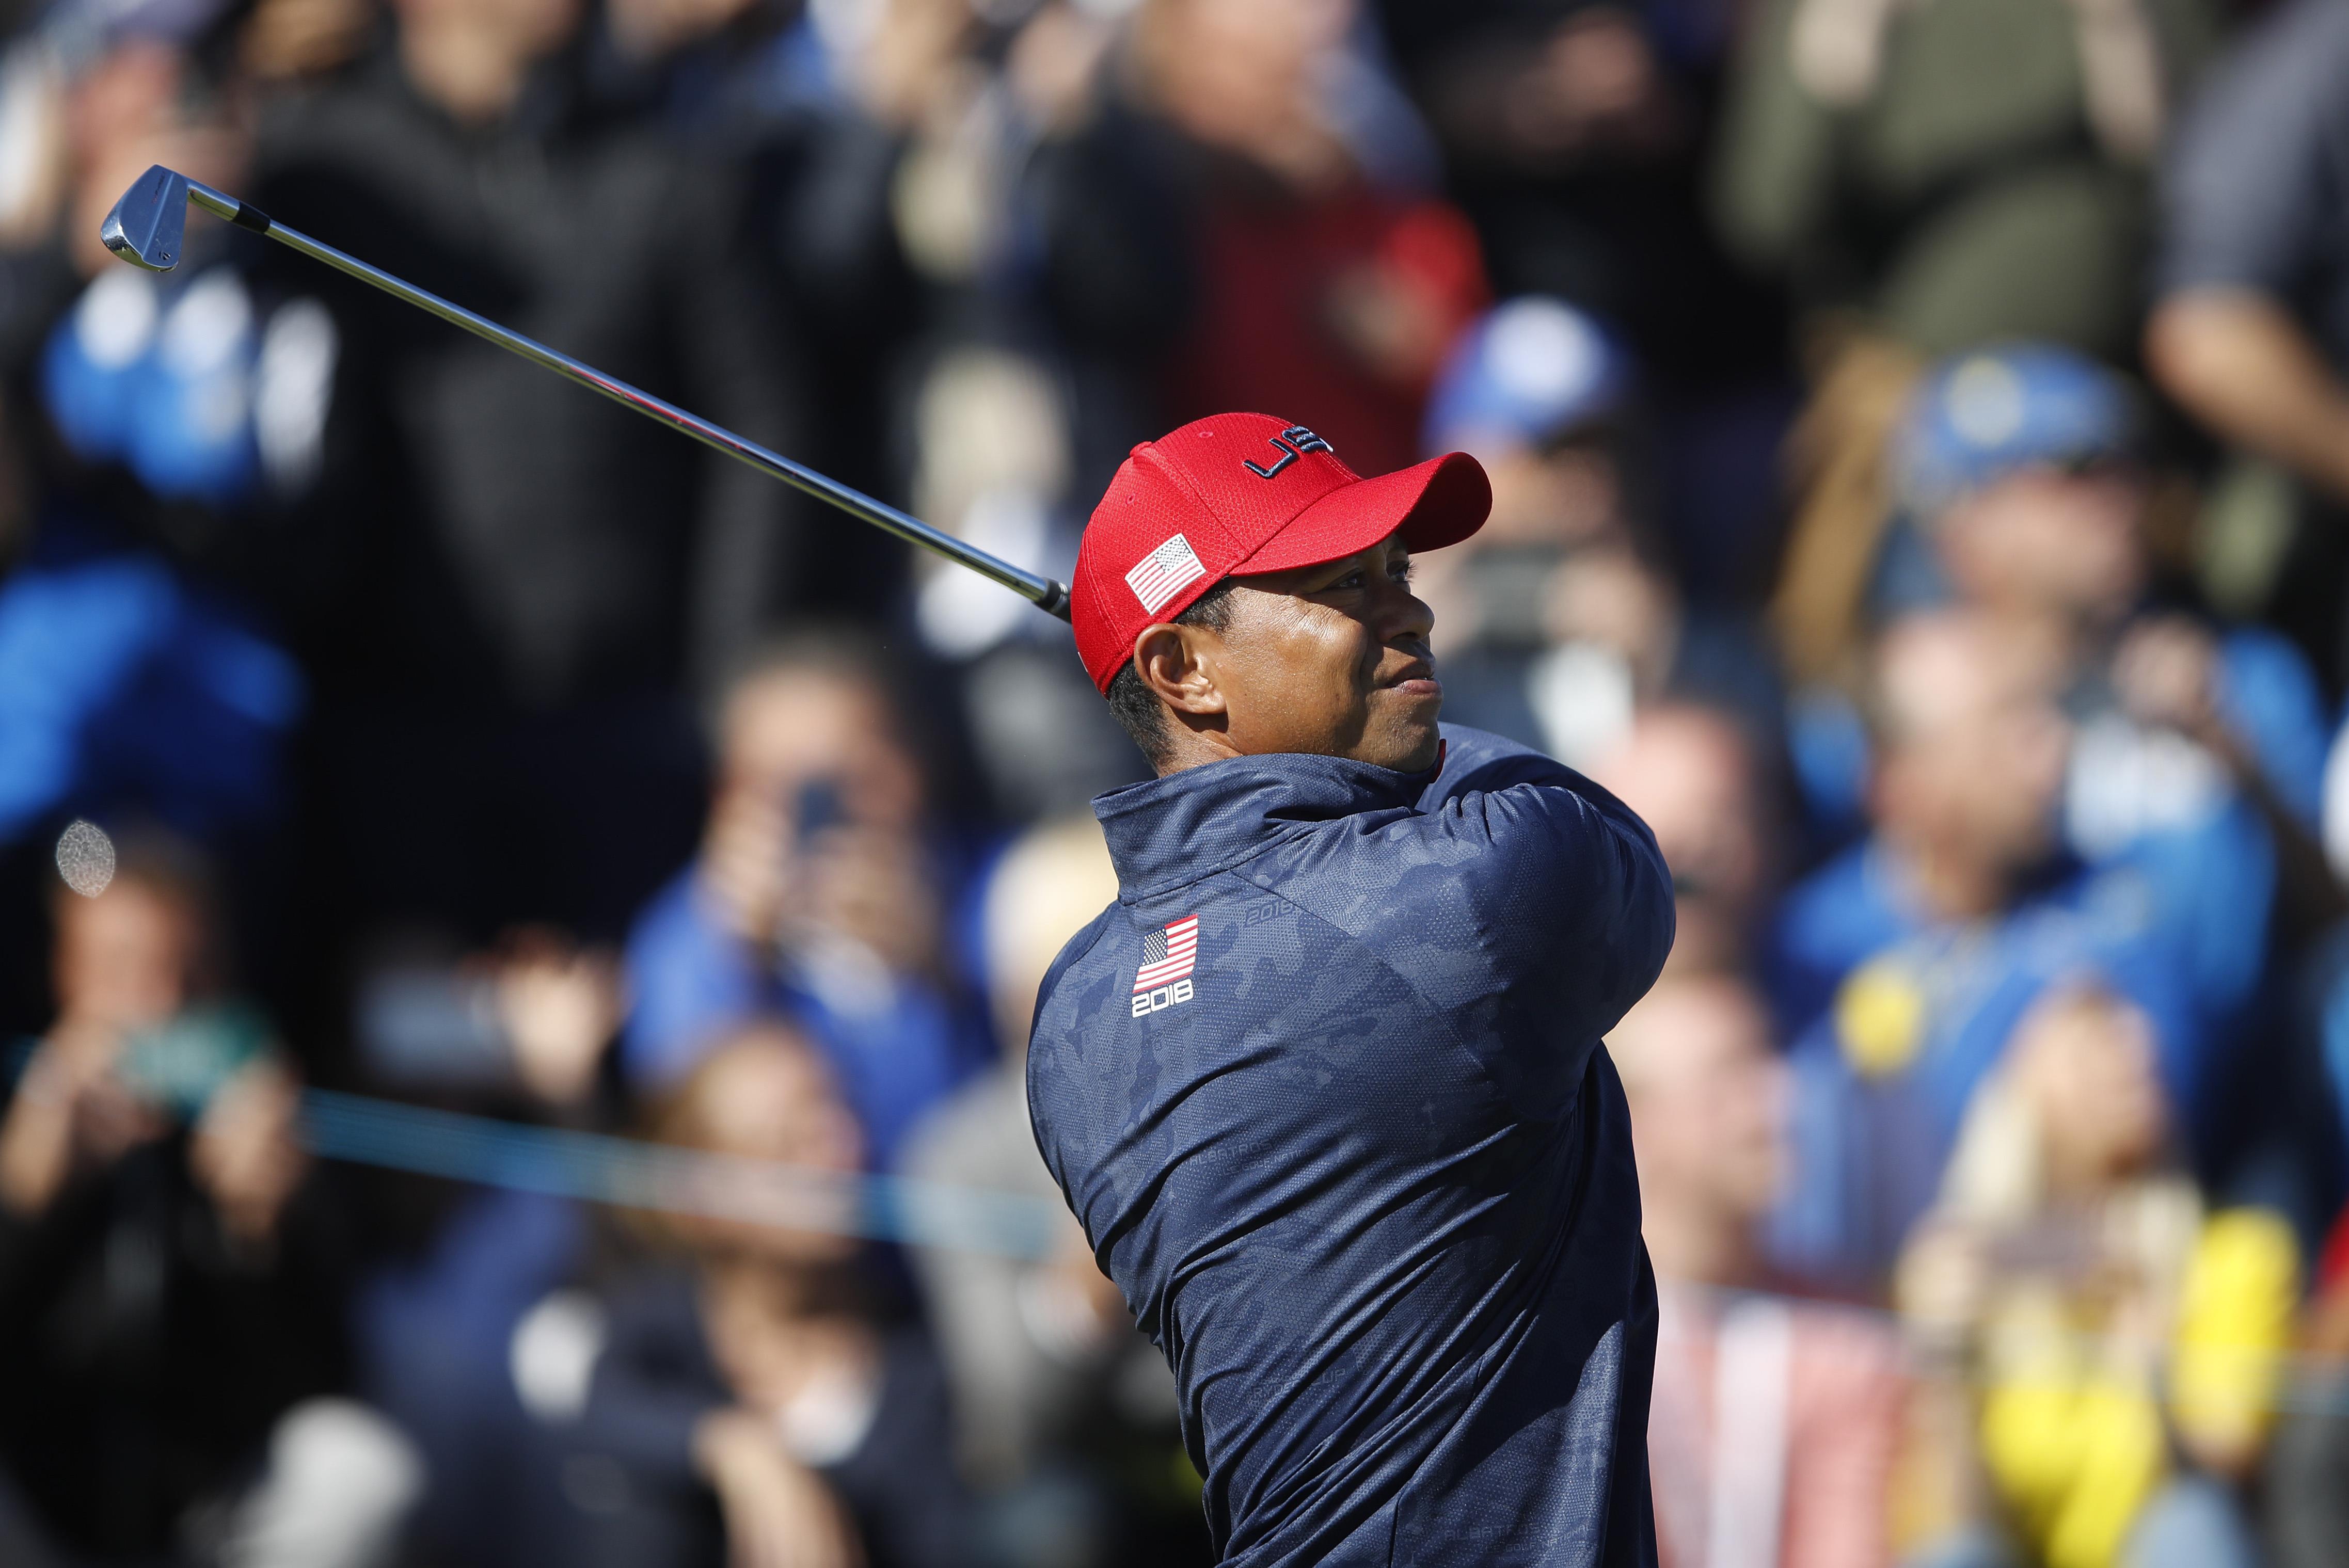 Golf: Weary Woods sleepwalks his way to four Ryder Cup losses